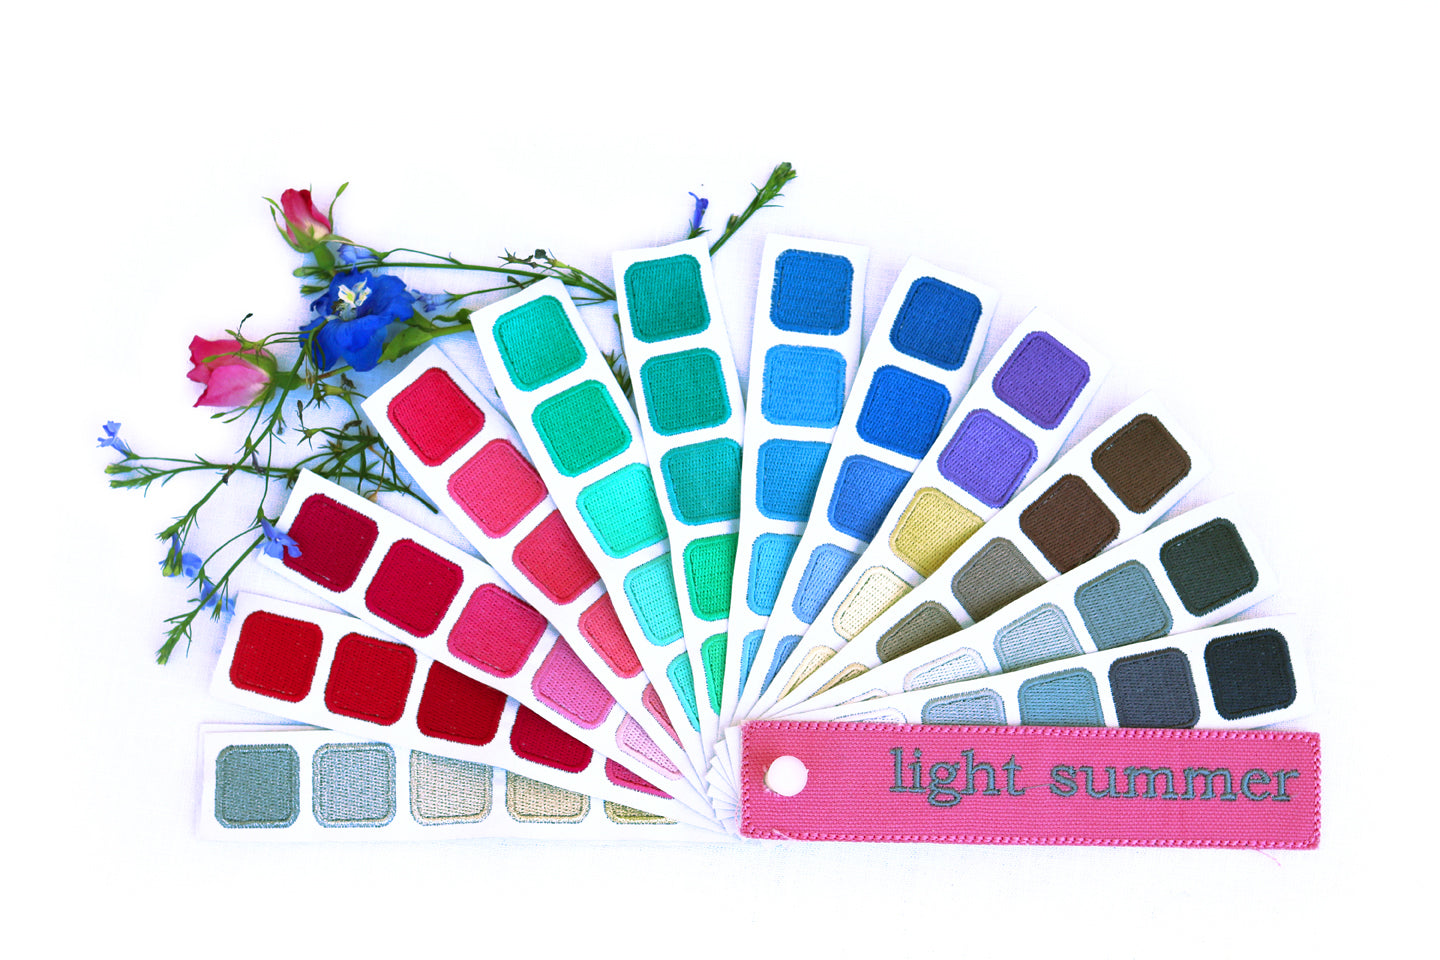 Vibrant Color Palette Cards - Perfect for Winter Seasons